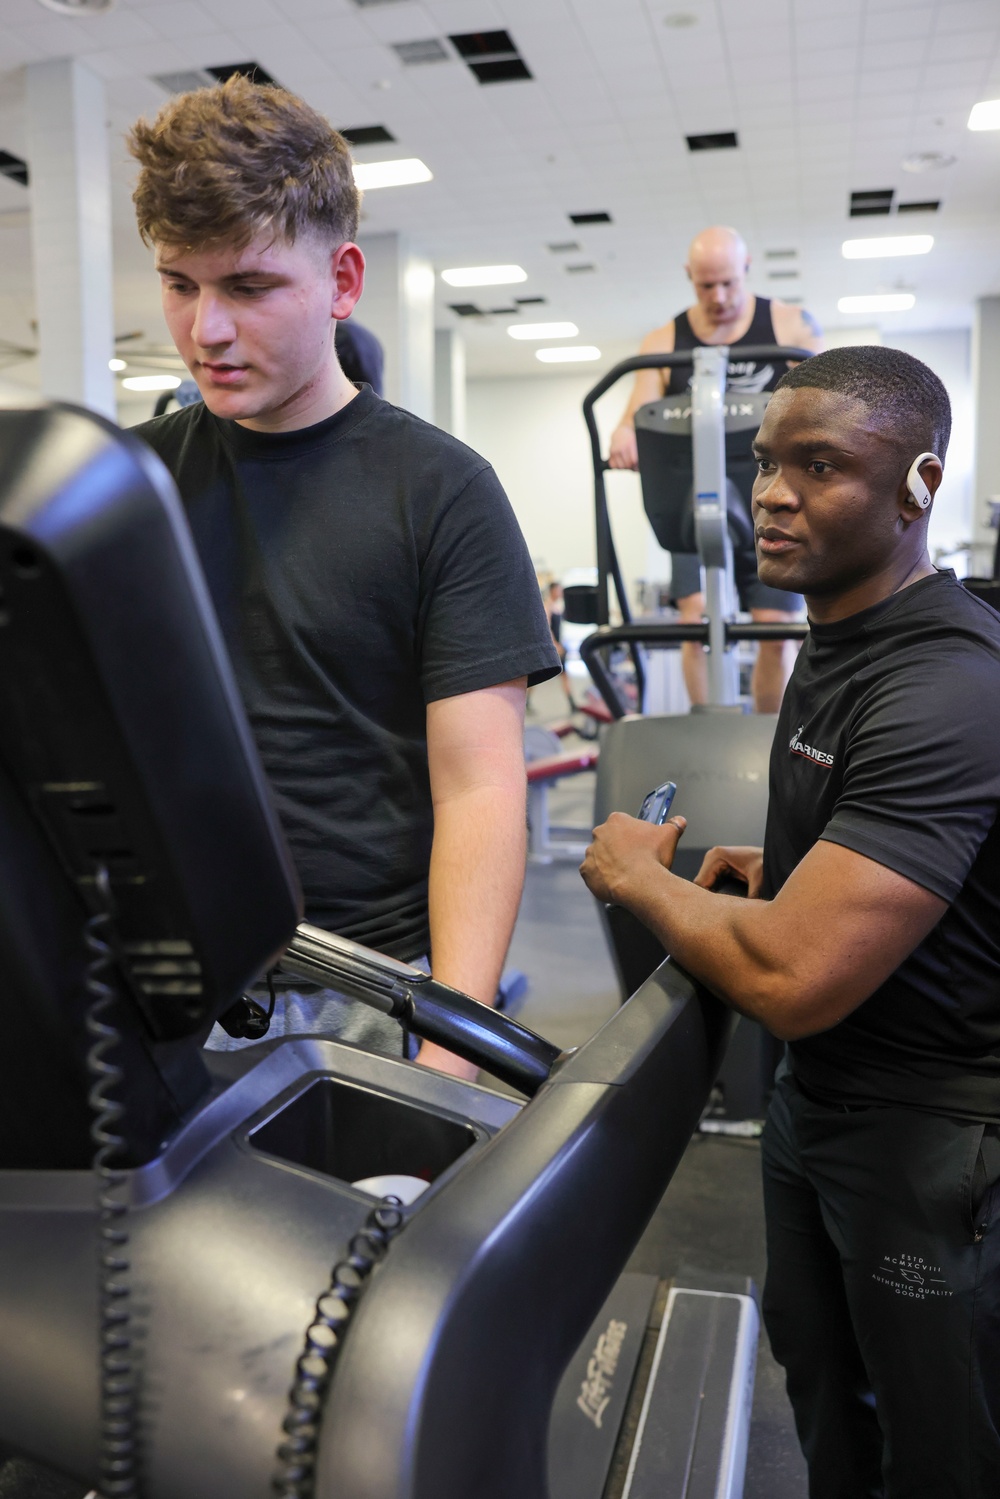 From Cameroon to ‘Cammies’: One Marine’s Journey